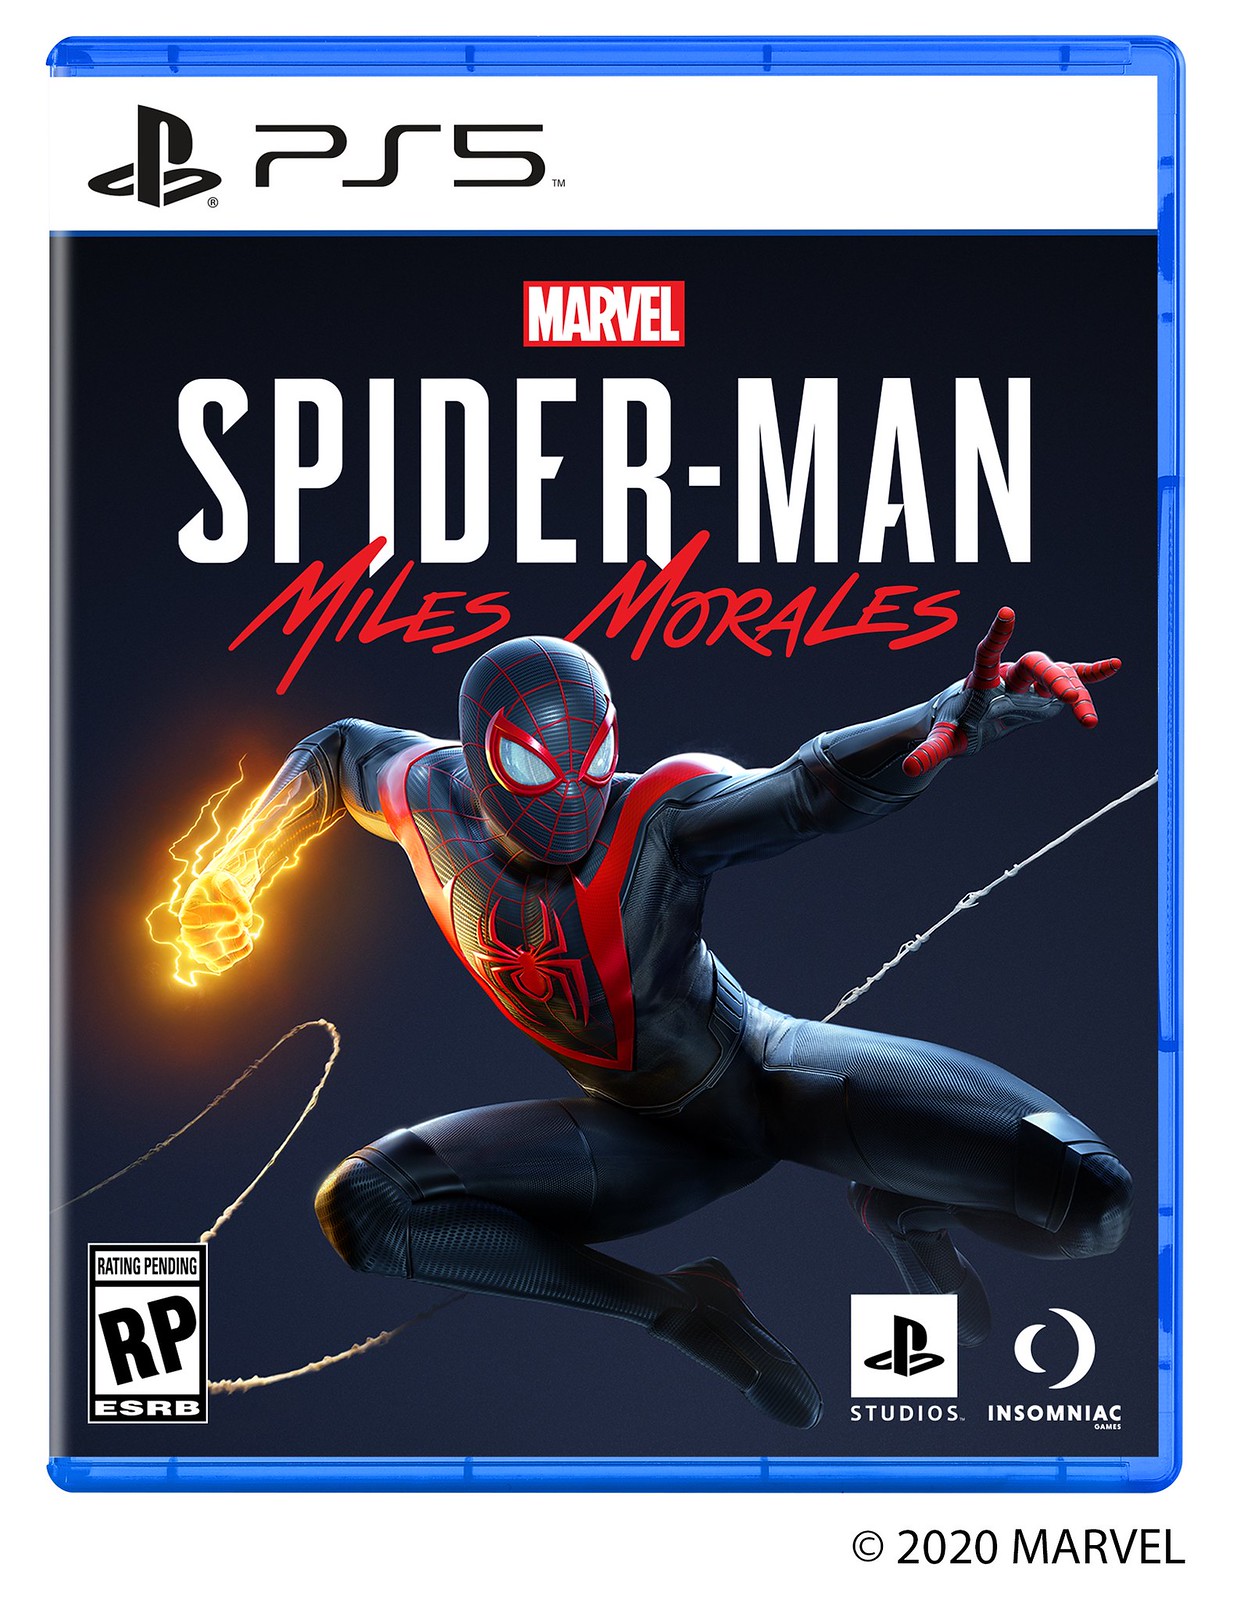 PS5 physical game cases spider-man miles morales box art